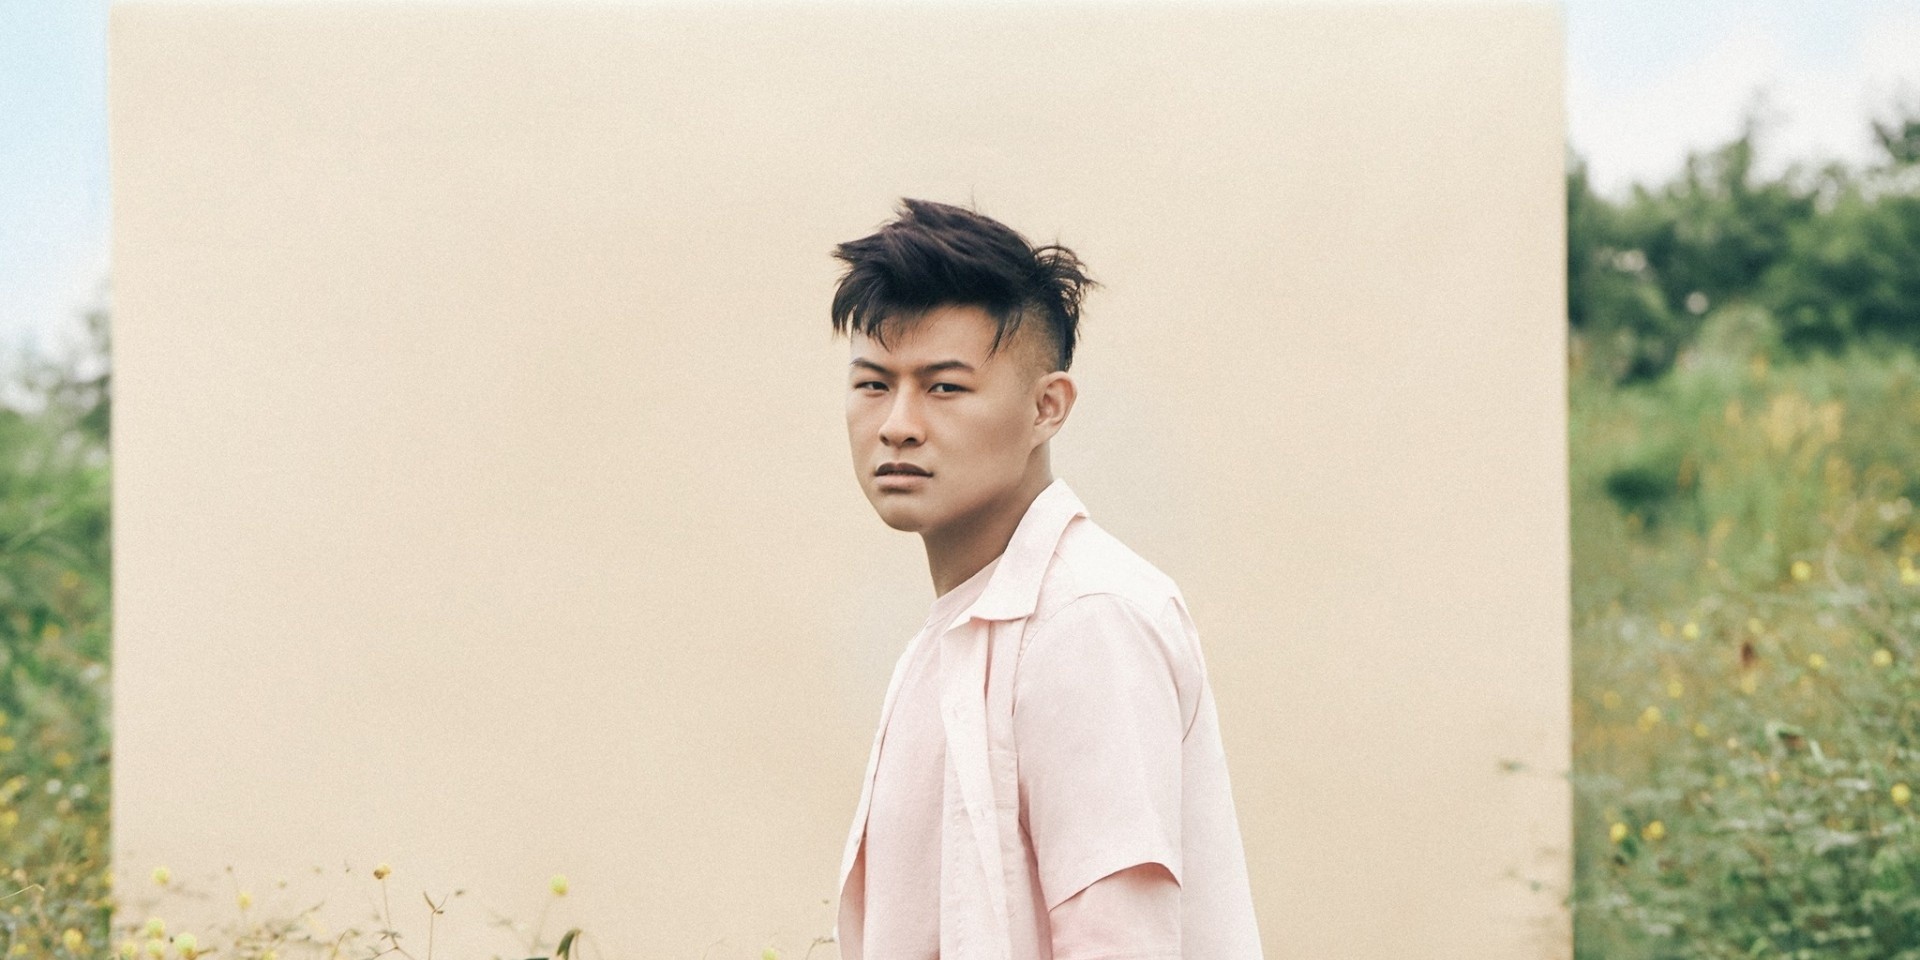 LEW releases gorgeous new song 'Short Story Long' - listen"